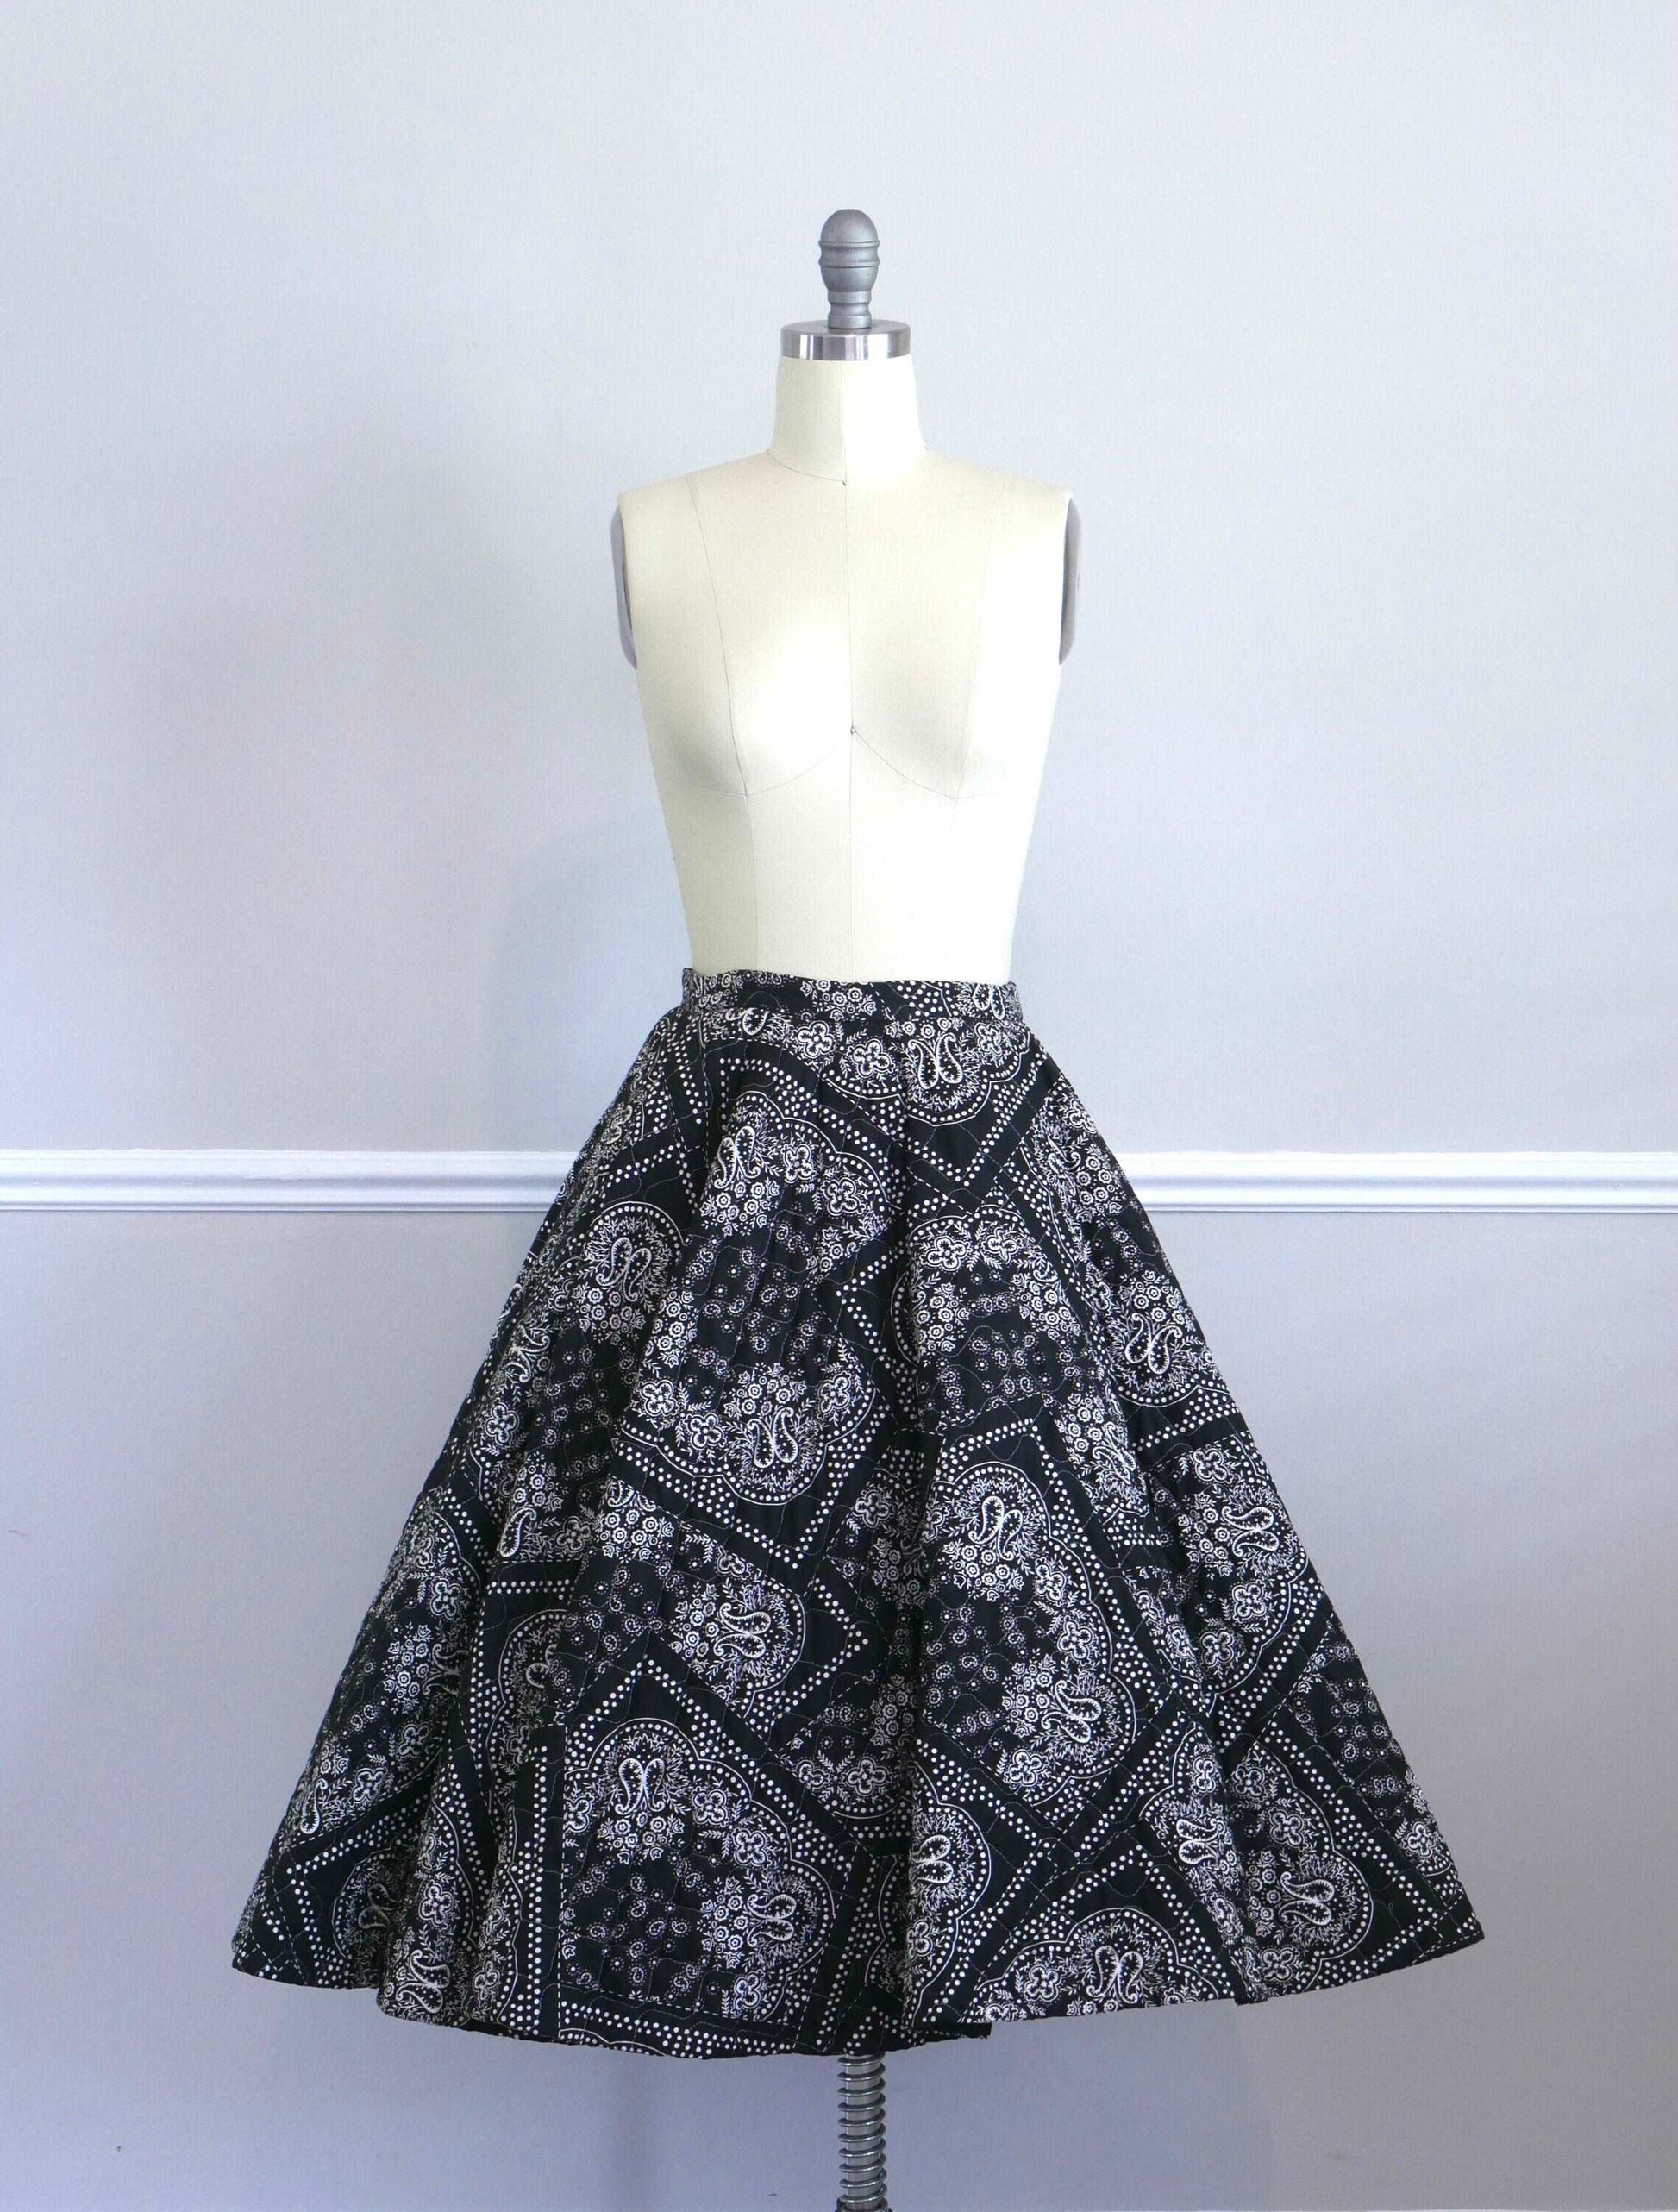 ON SALE Vintage 1950s Hanky Print Quilted Circle Skirt / 50s navy blue fit and flare skirt size s